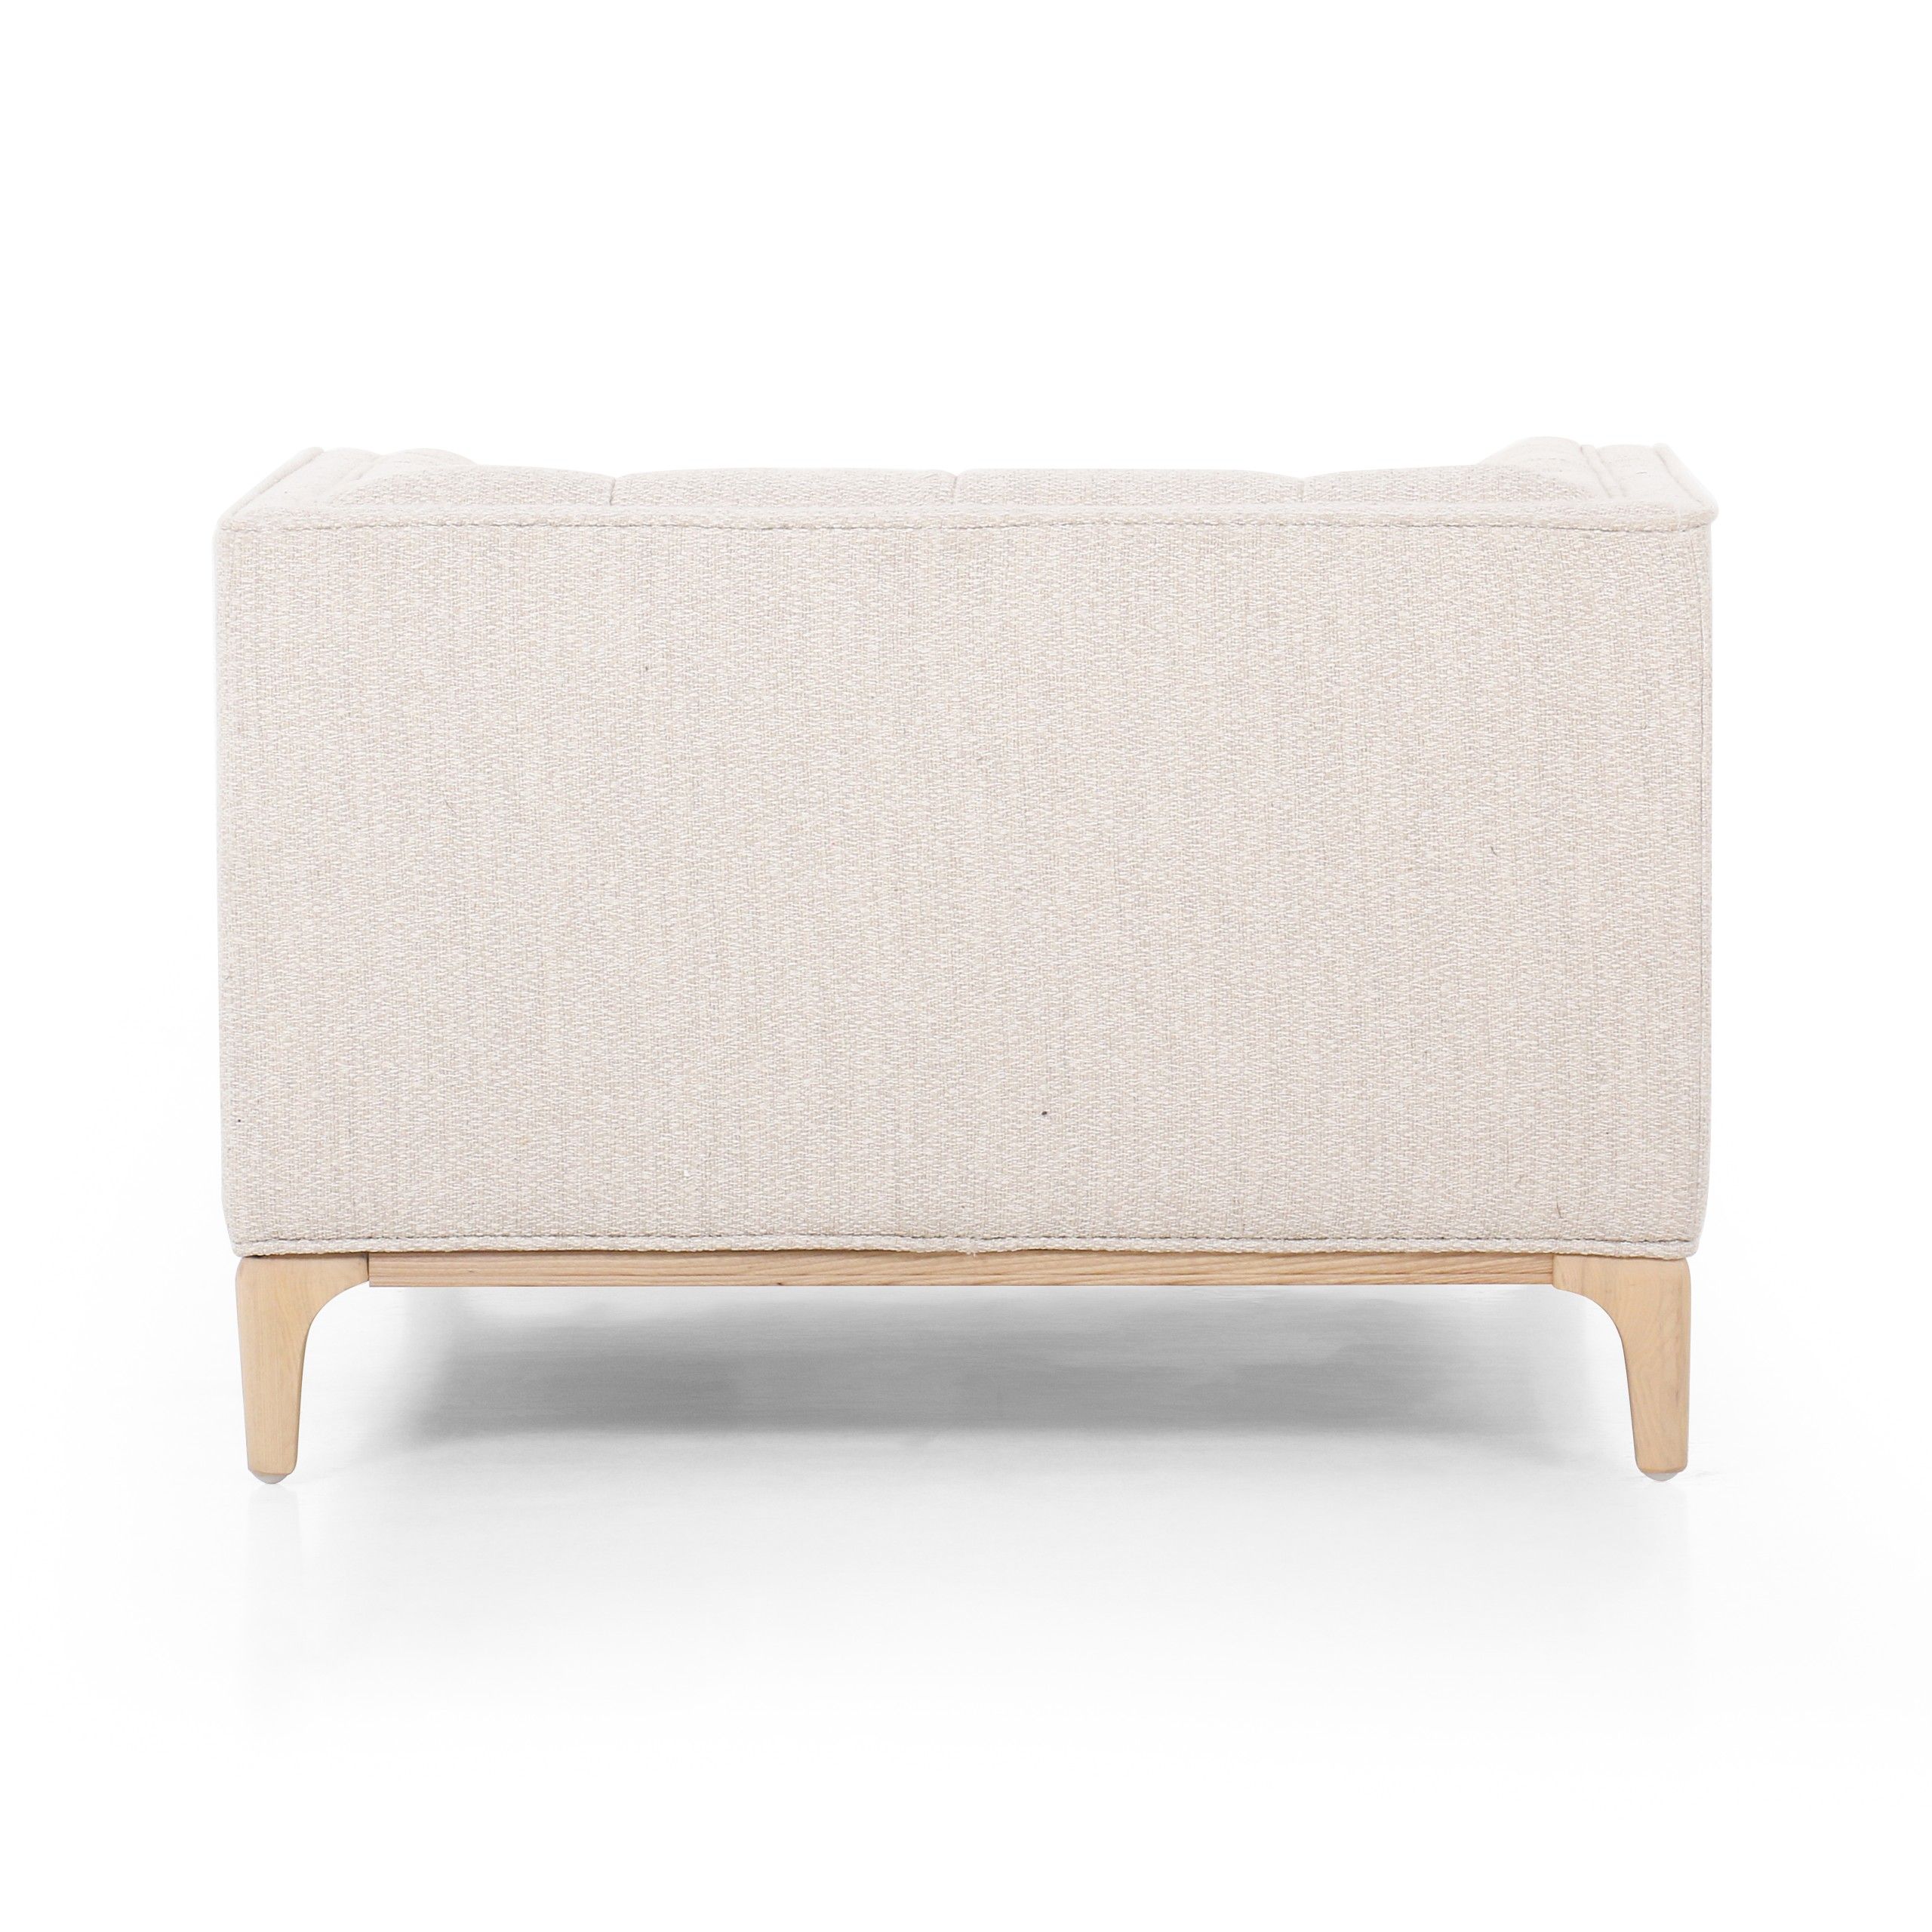 Dylan Chaise Lounge - Kerbey Taupe back